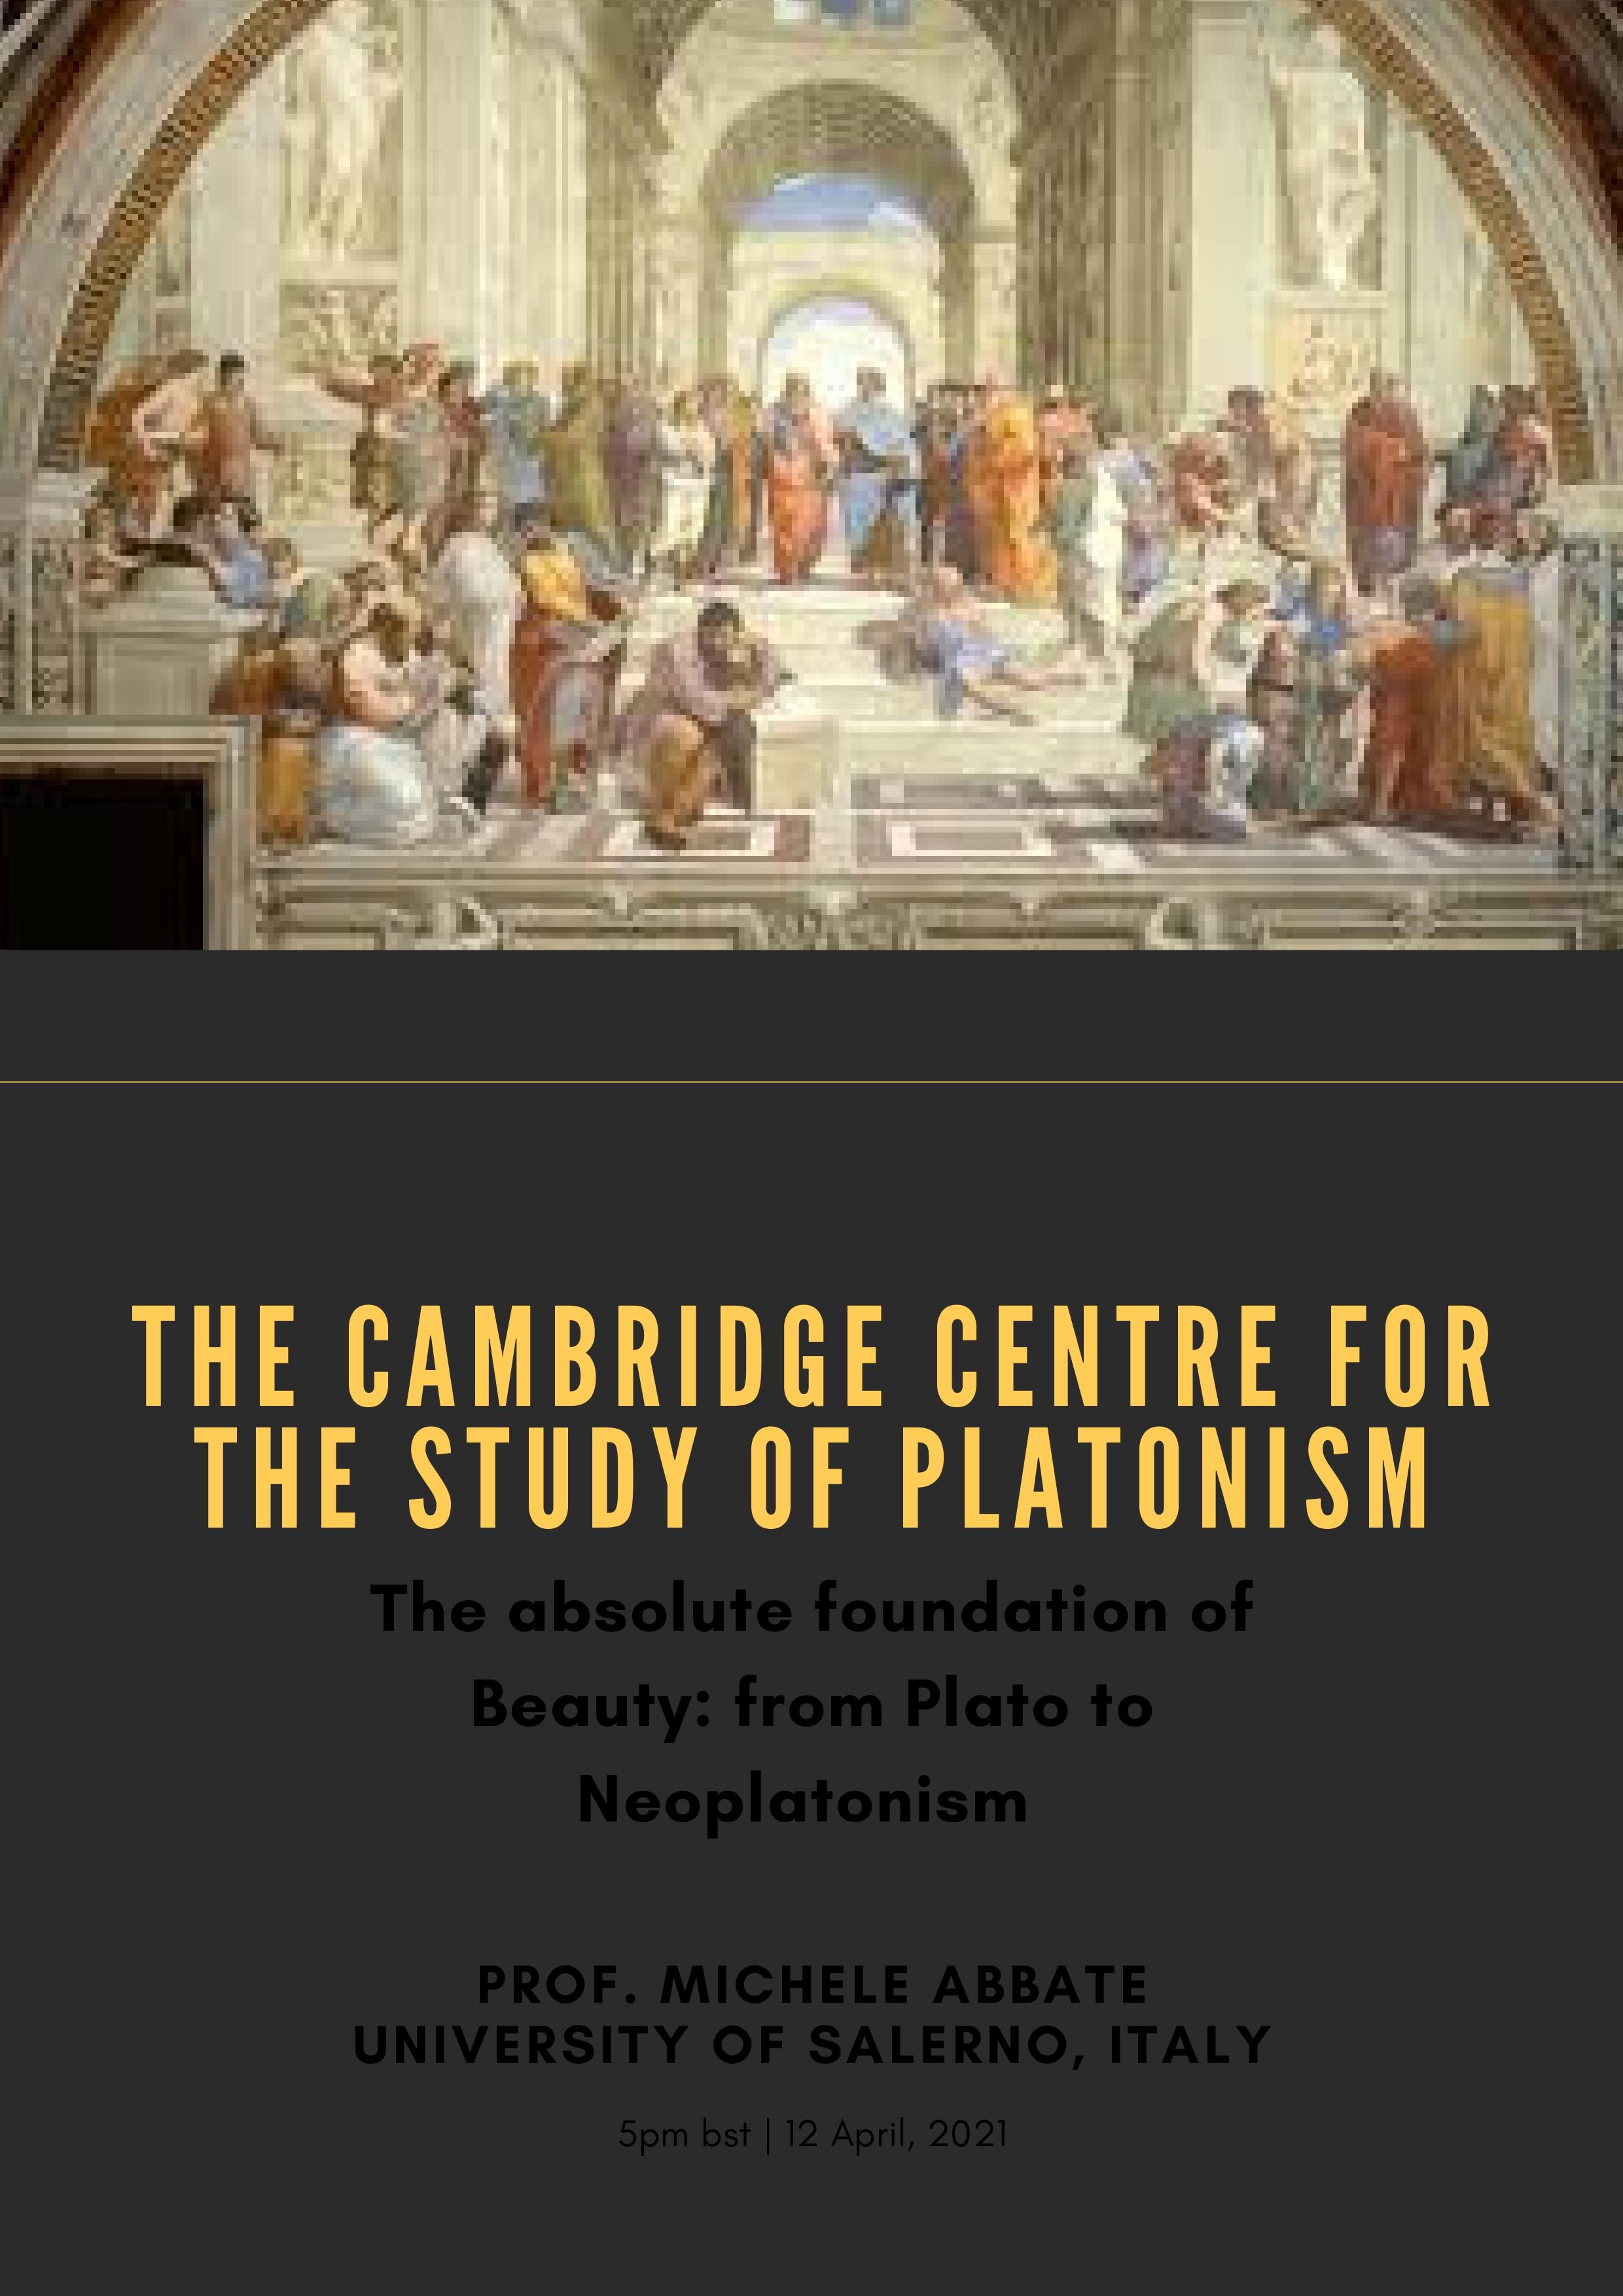 Prof. Michele Abbate - "The absolute foundation of Beauty: from Plato to Neoplatonism"